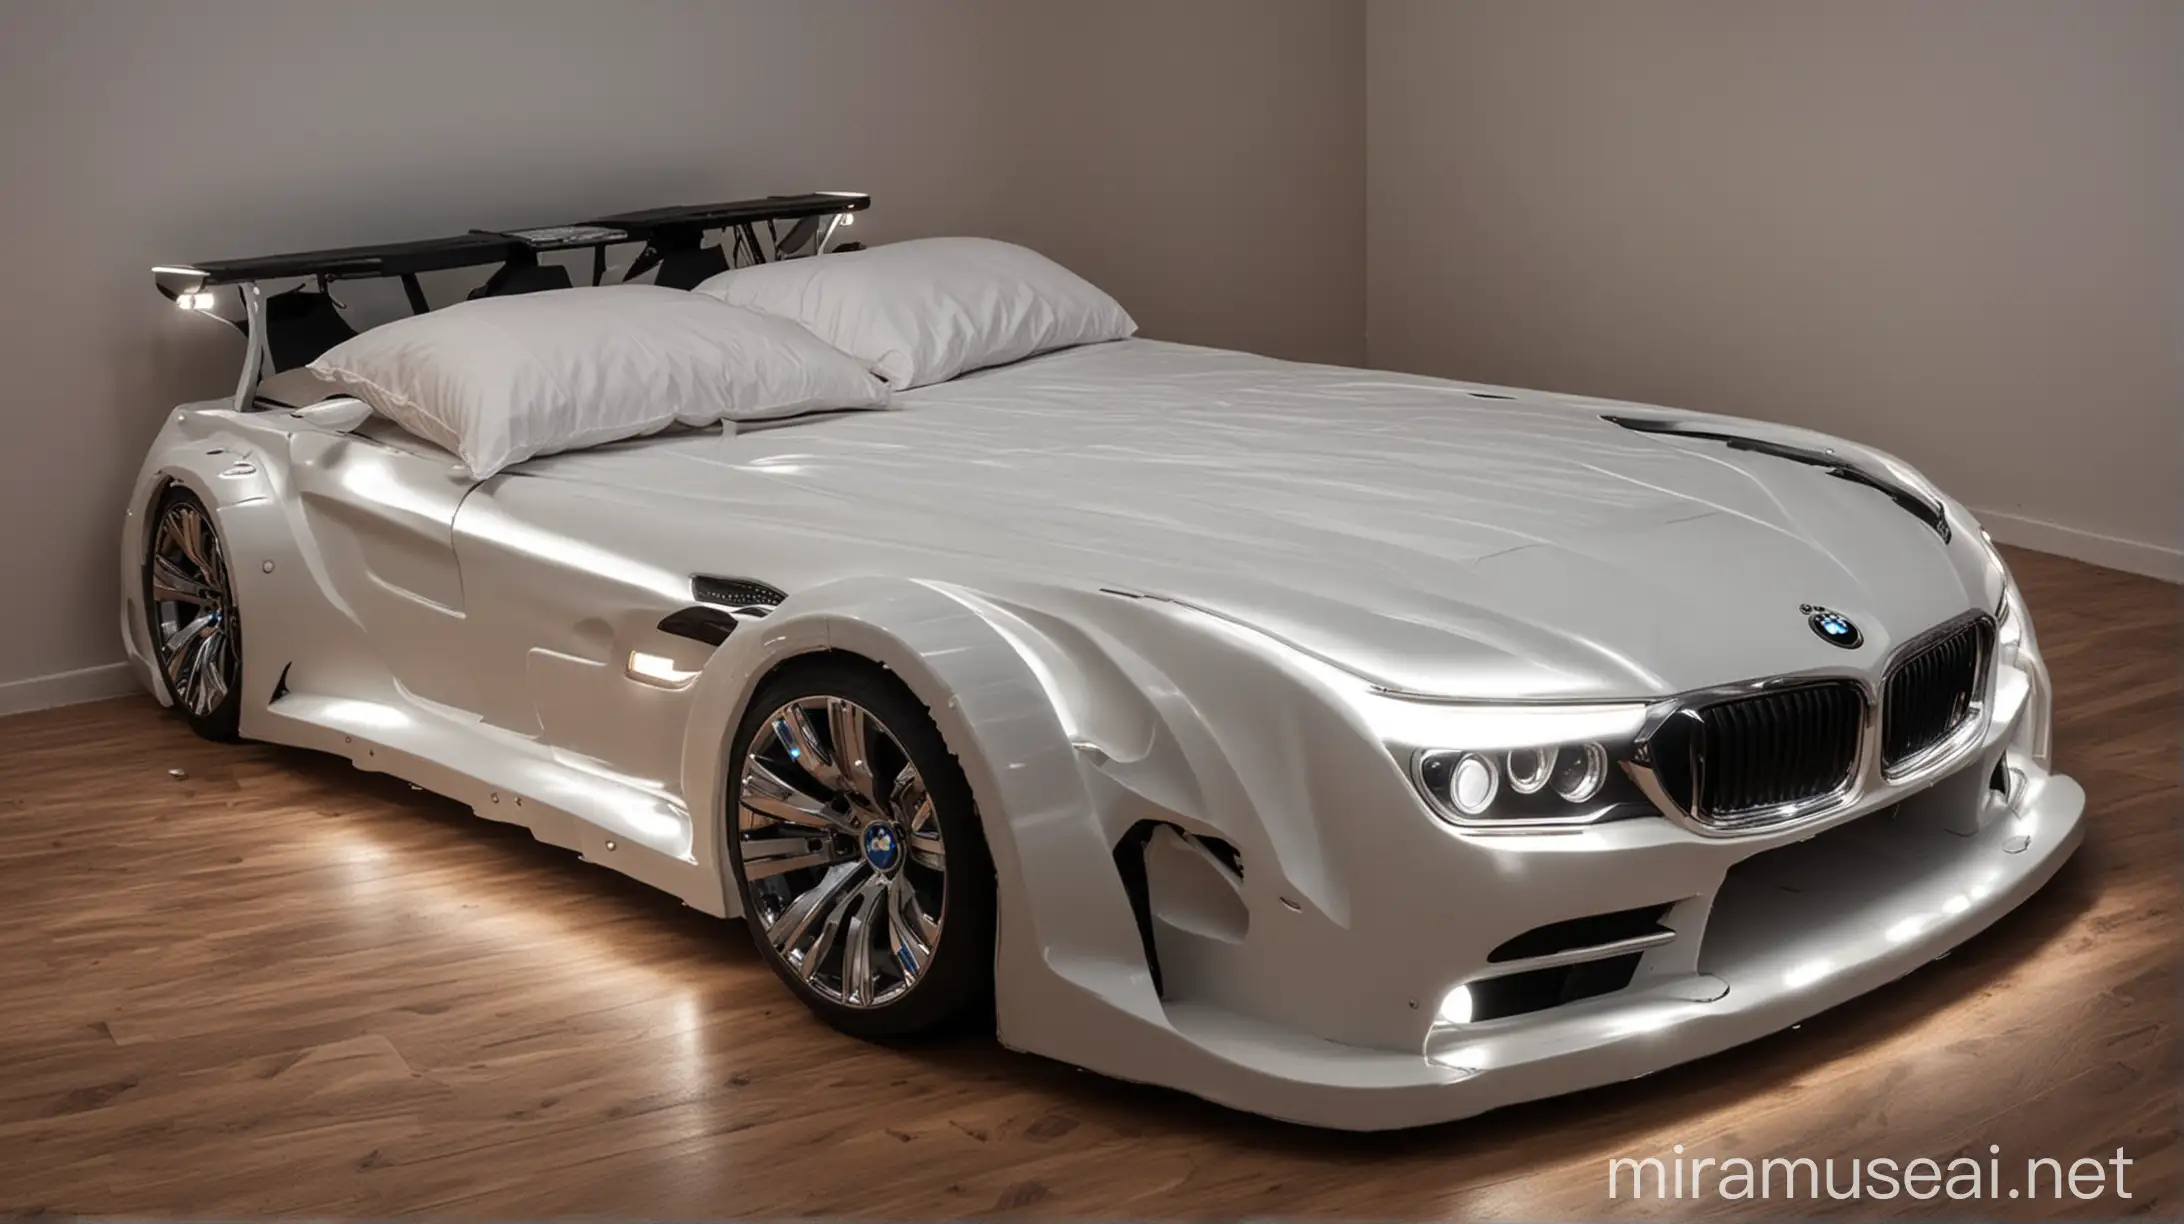 Luxurious BMW Car Double Bed with Headlights and Tuning Lights